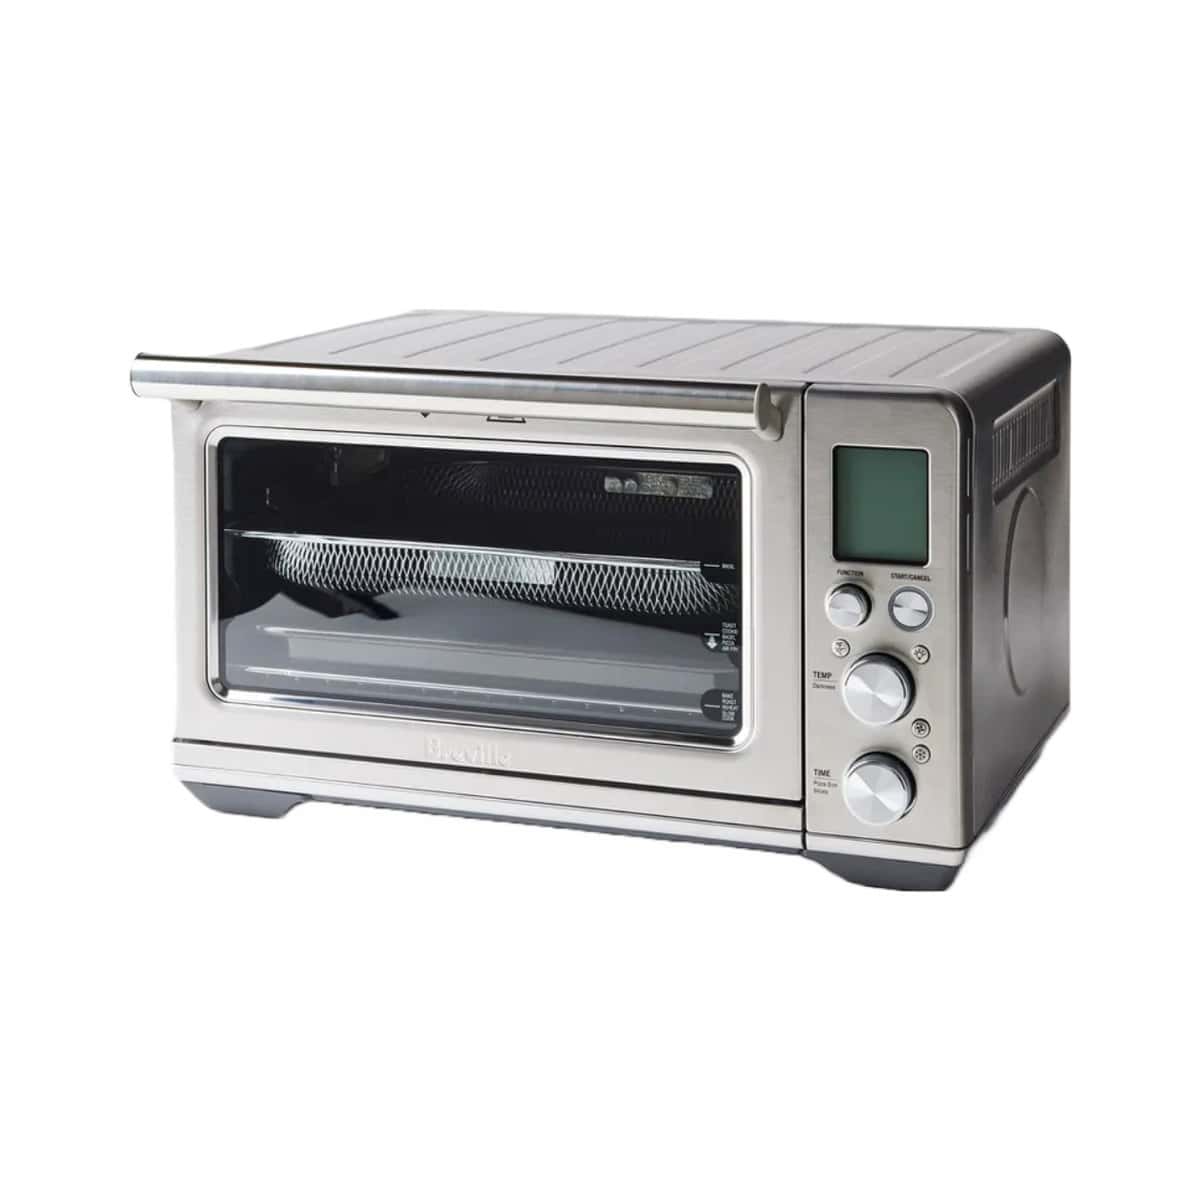 Breville countertop oven on a white background